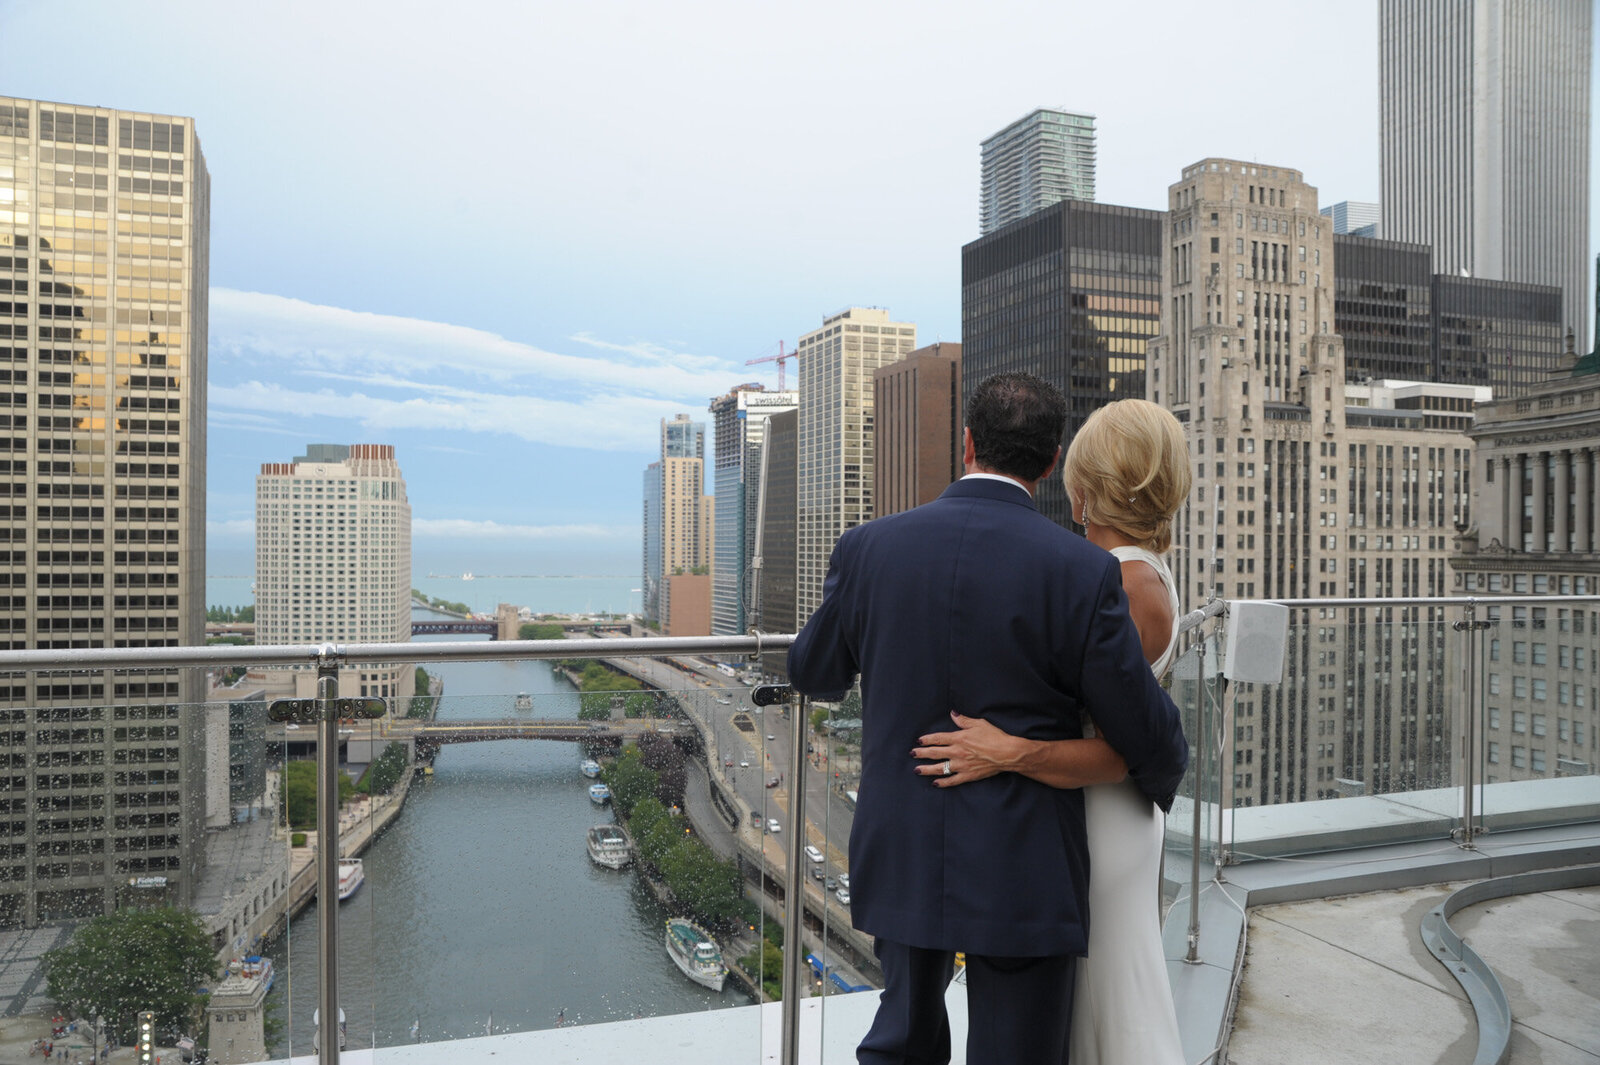 Couple on top of a building looking at a beautiful view that has tall buildings, river and bridge